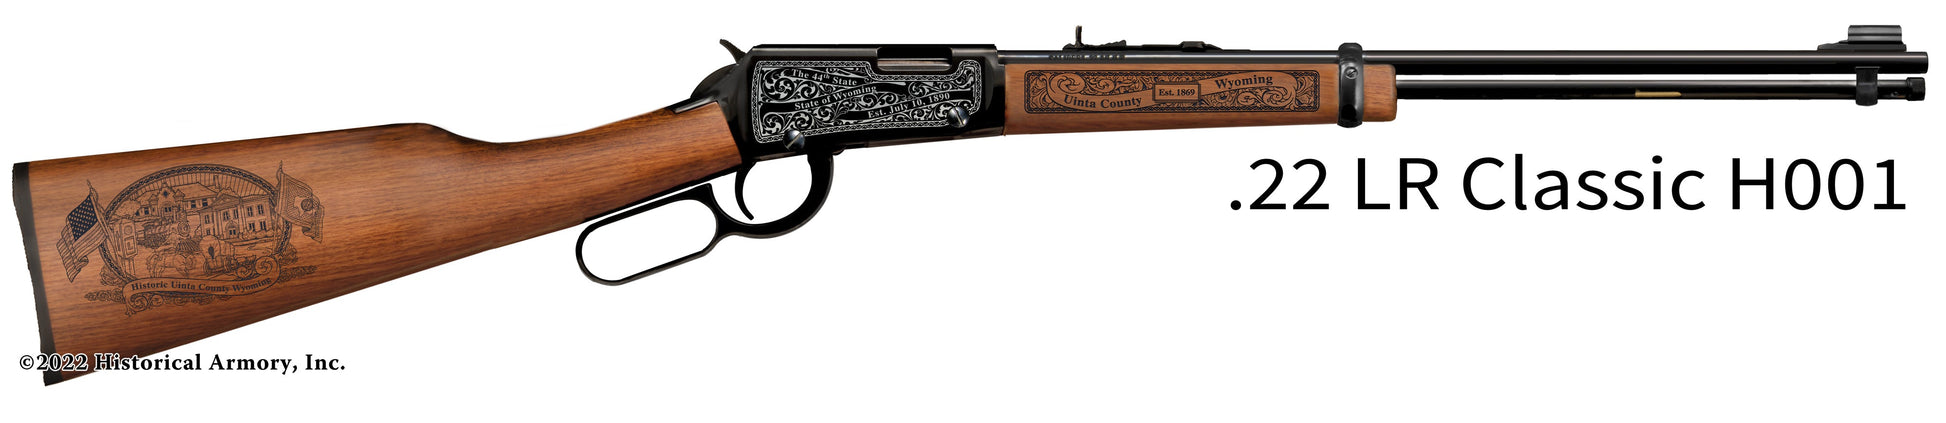 Uinta County Wyoming Engraved Henry H001 Rifle